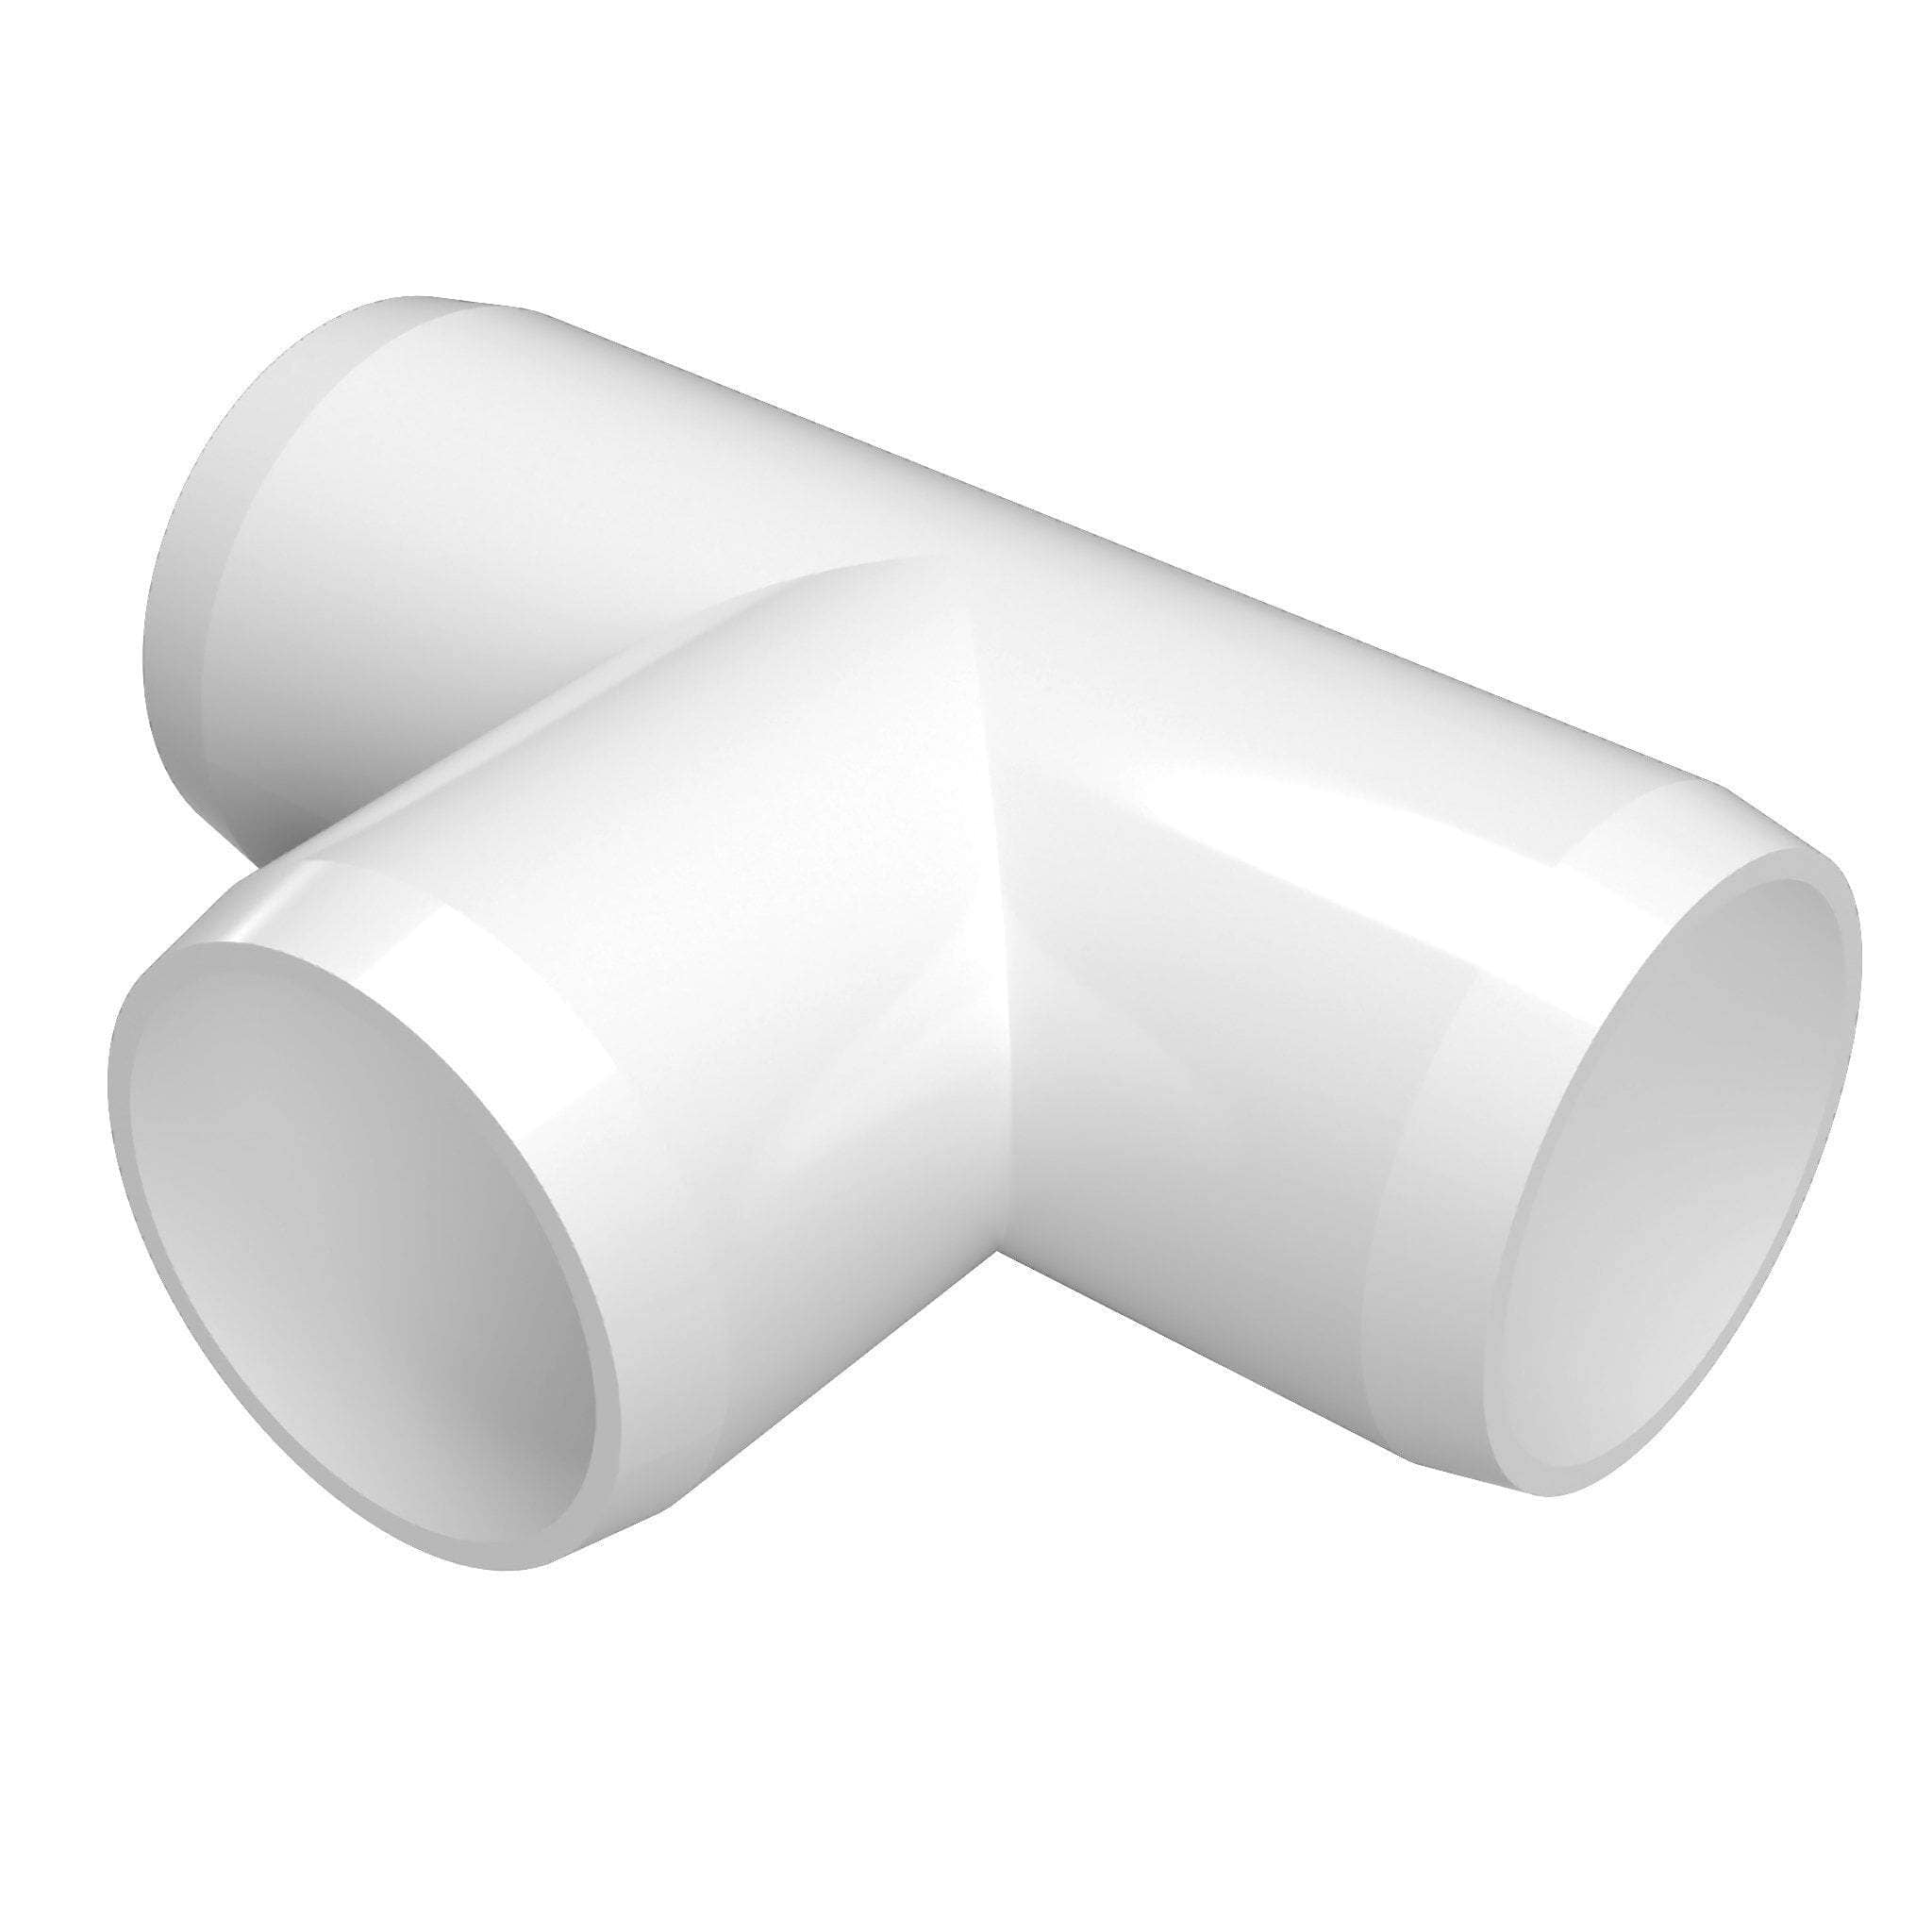 Midline Valve 592DU3412 PVC Compression Tee Pipe Fitting with FIP Branch;  3/4 x 1/2; White Plastic